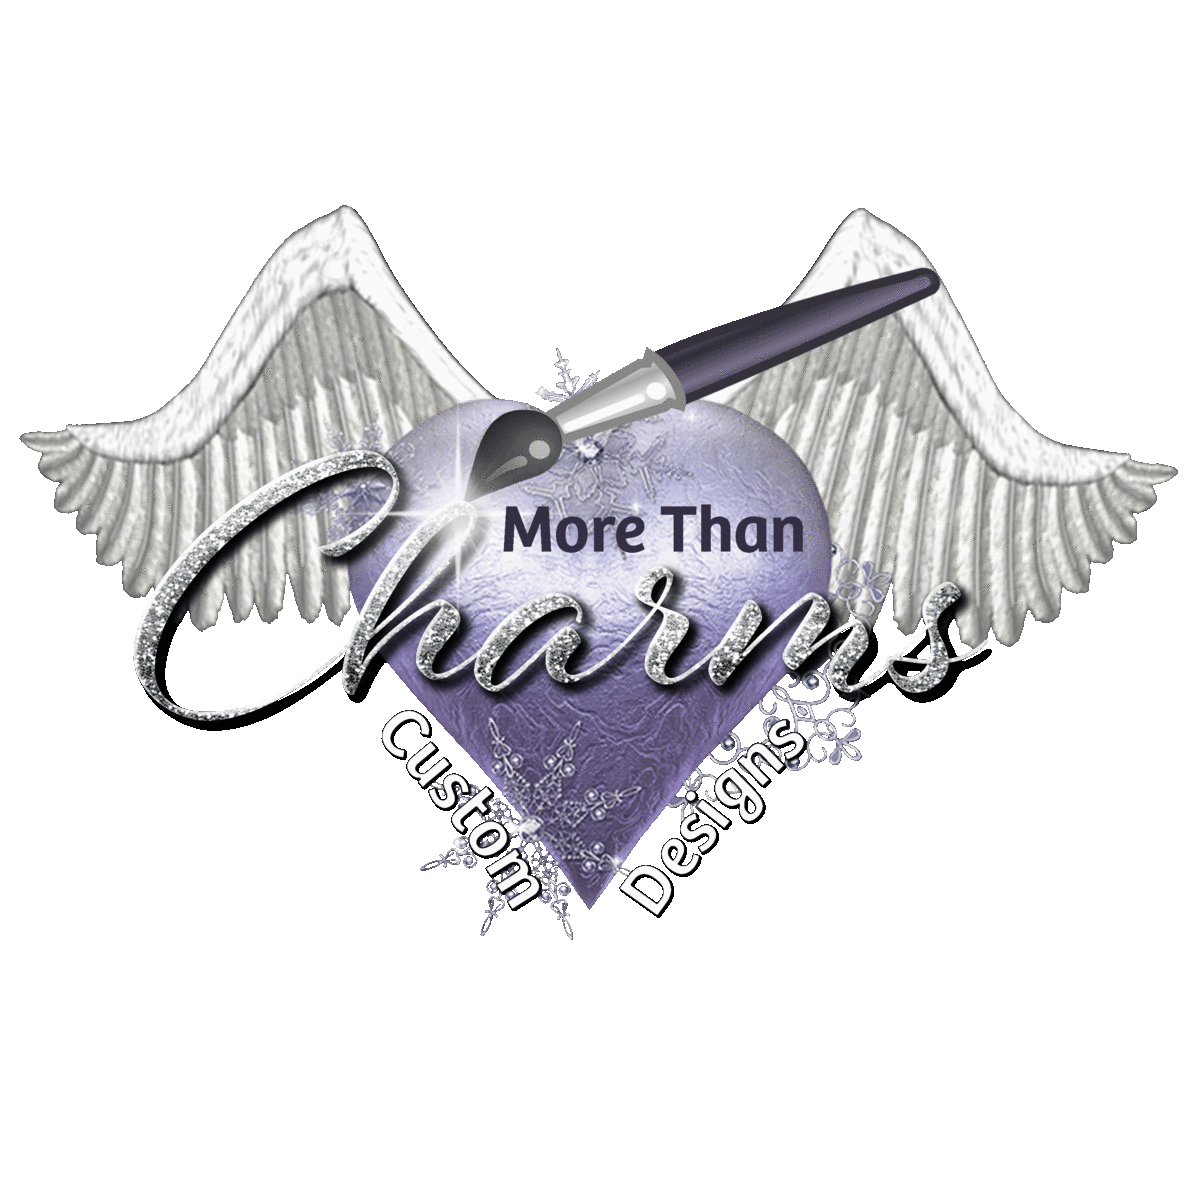 More Than Charms Custom Designed ProductsWe create custom designed products just for you